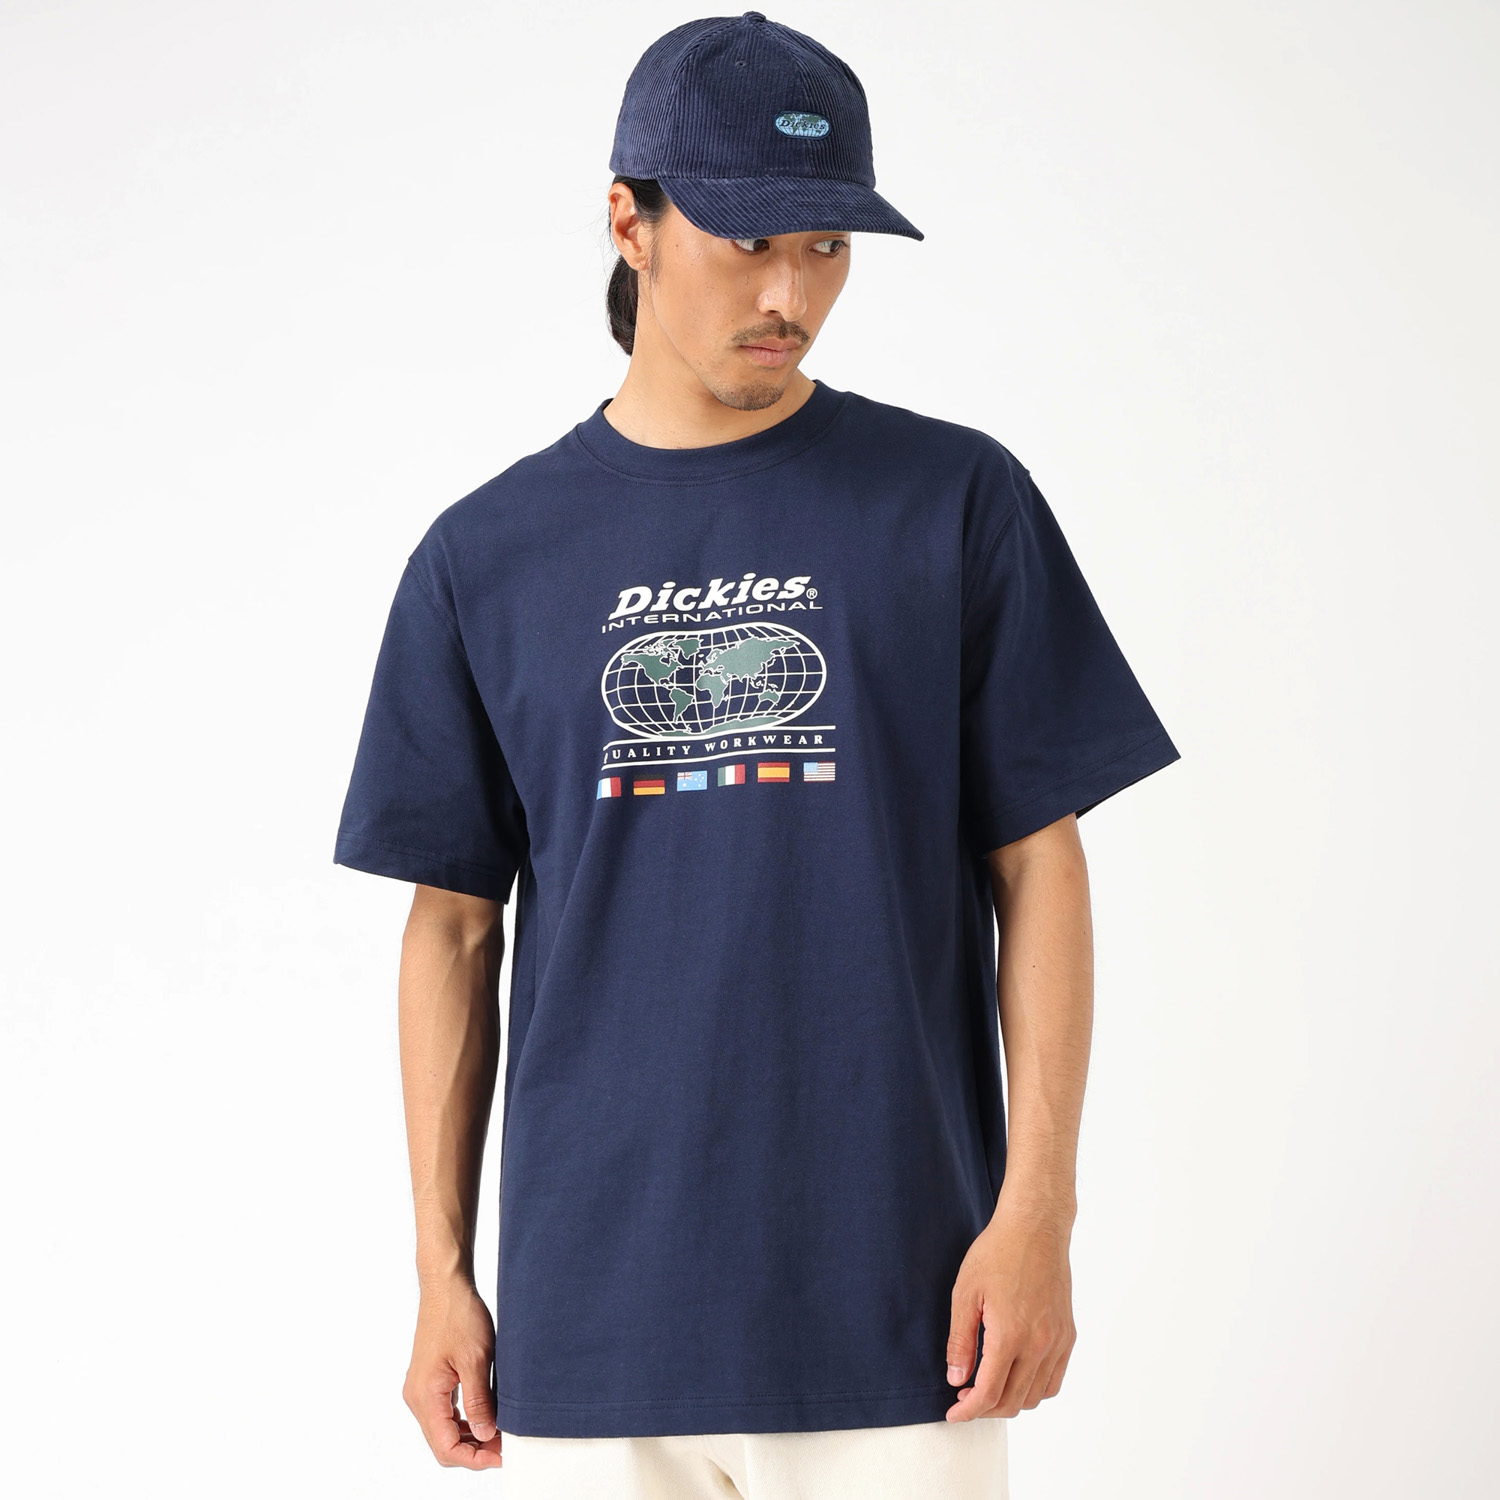 Jake Hayes グラフィック Tシャツ "Dickies Internaional” image number 2